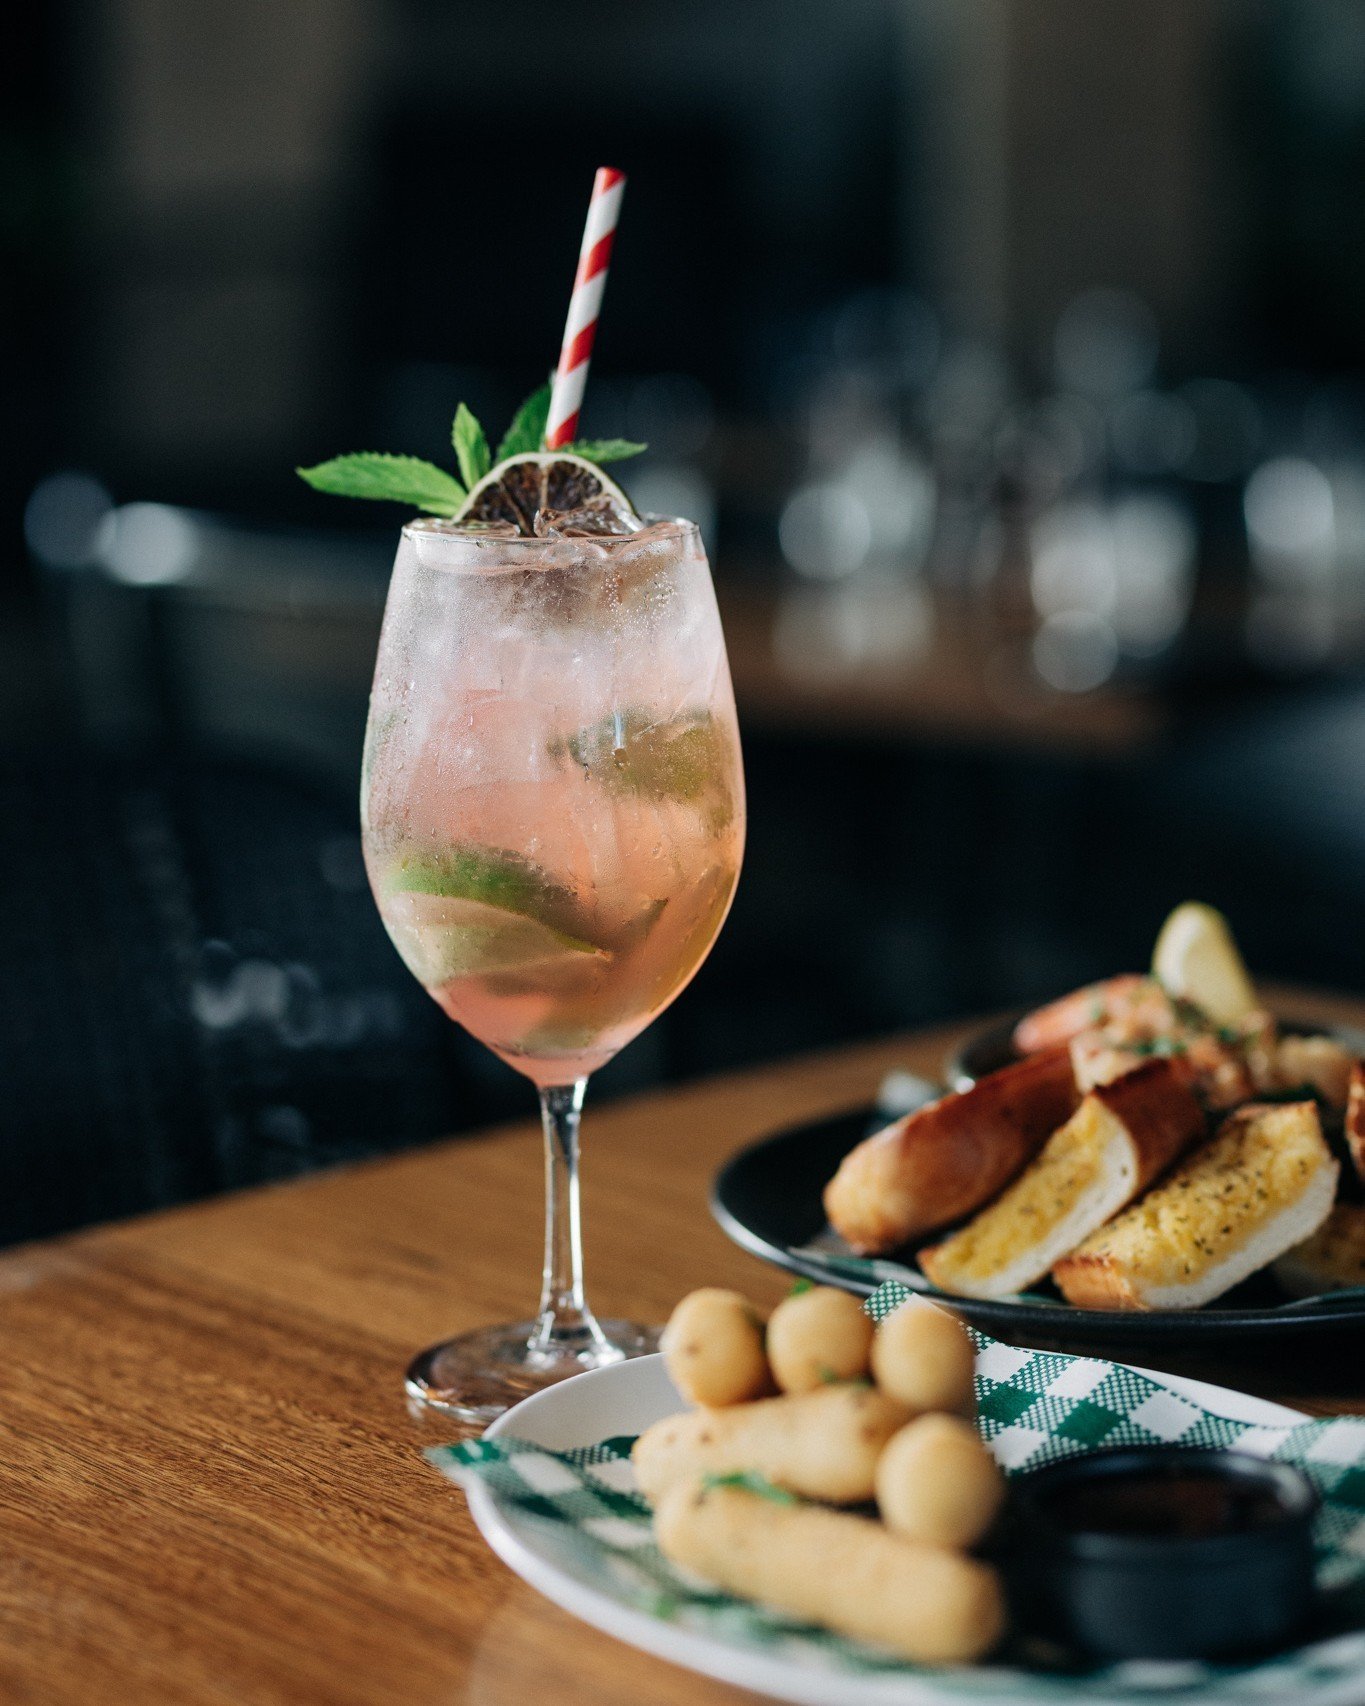 Parry St Garage will be opening for Mother&rsquo;s Day lunch! 🥂
With bookings available from 12pm, you can treat your Mum to a delicious Italian lunch. Who can say no to that?!

Visit our website and make your booking now 👏 #parrystgarage